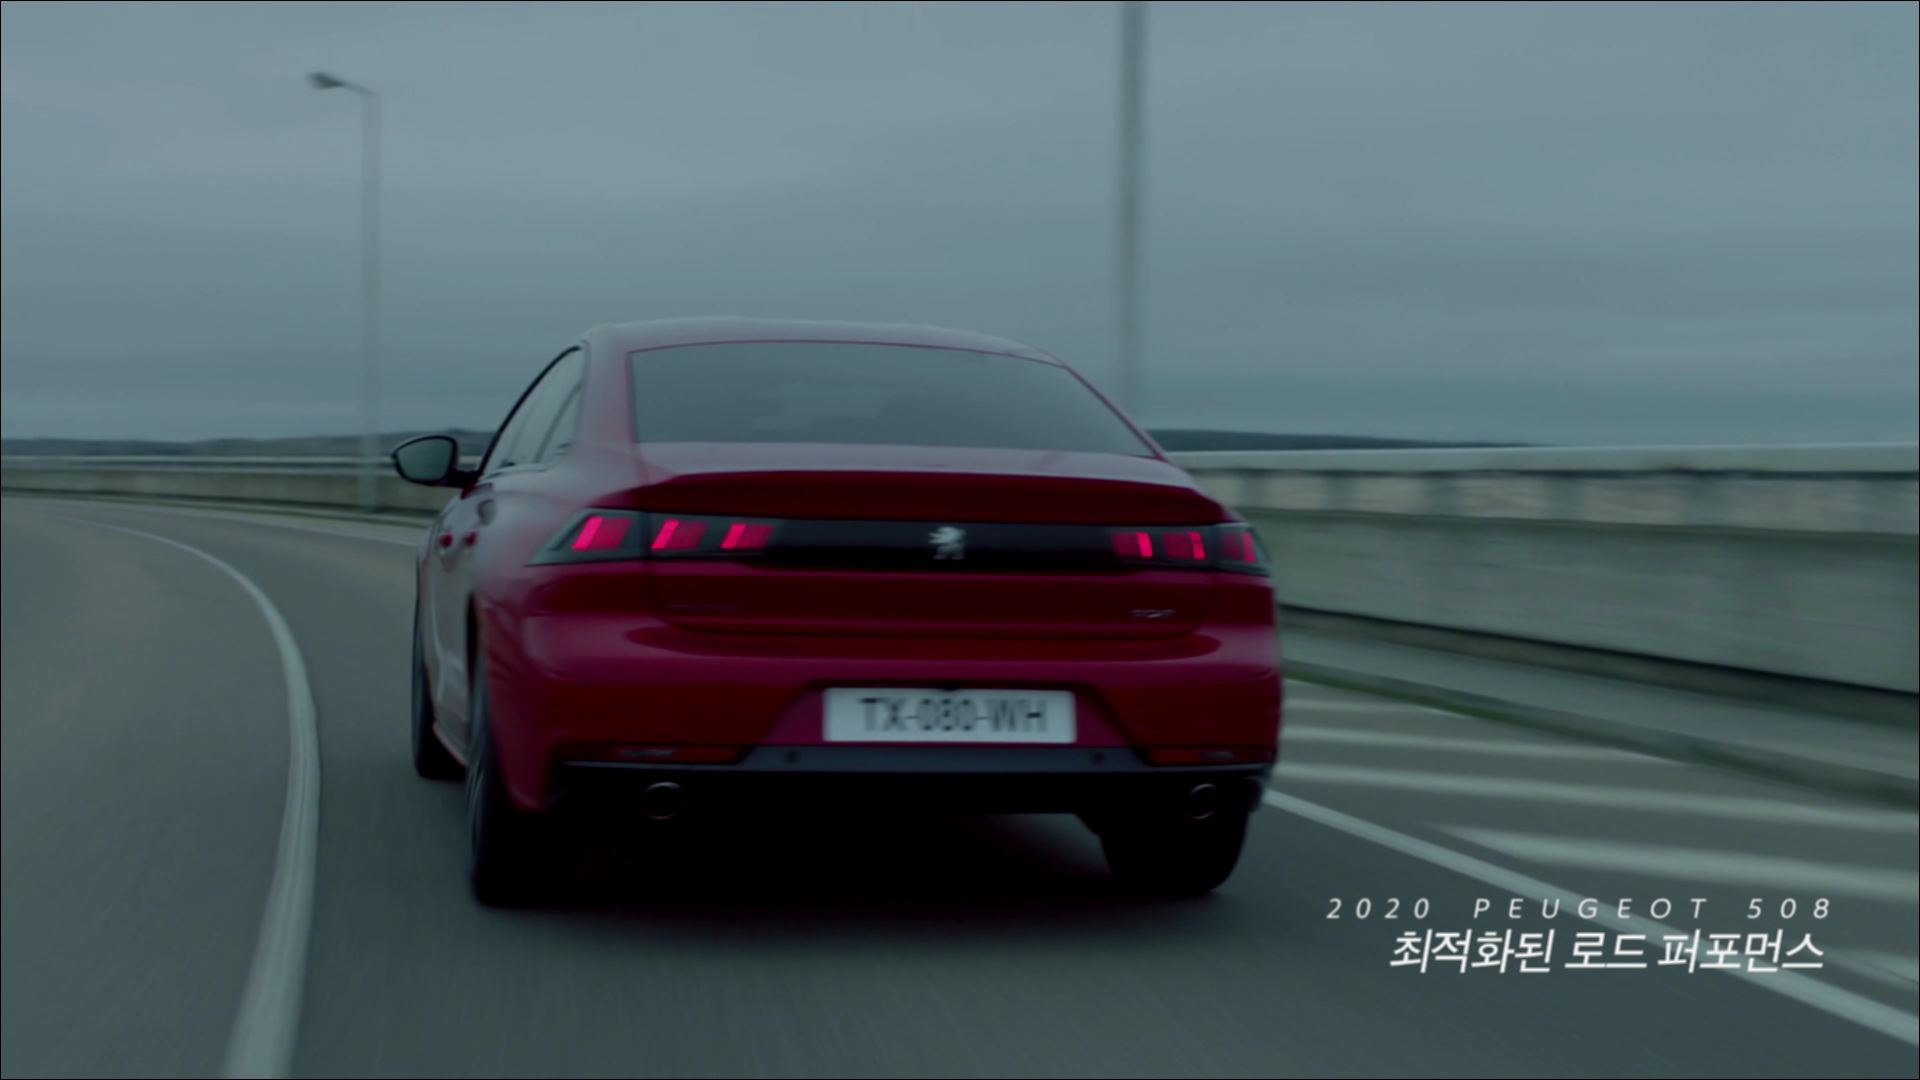 NEW PEUGEOT 508 - What Drives You?